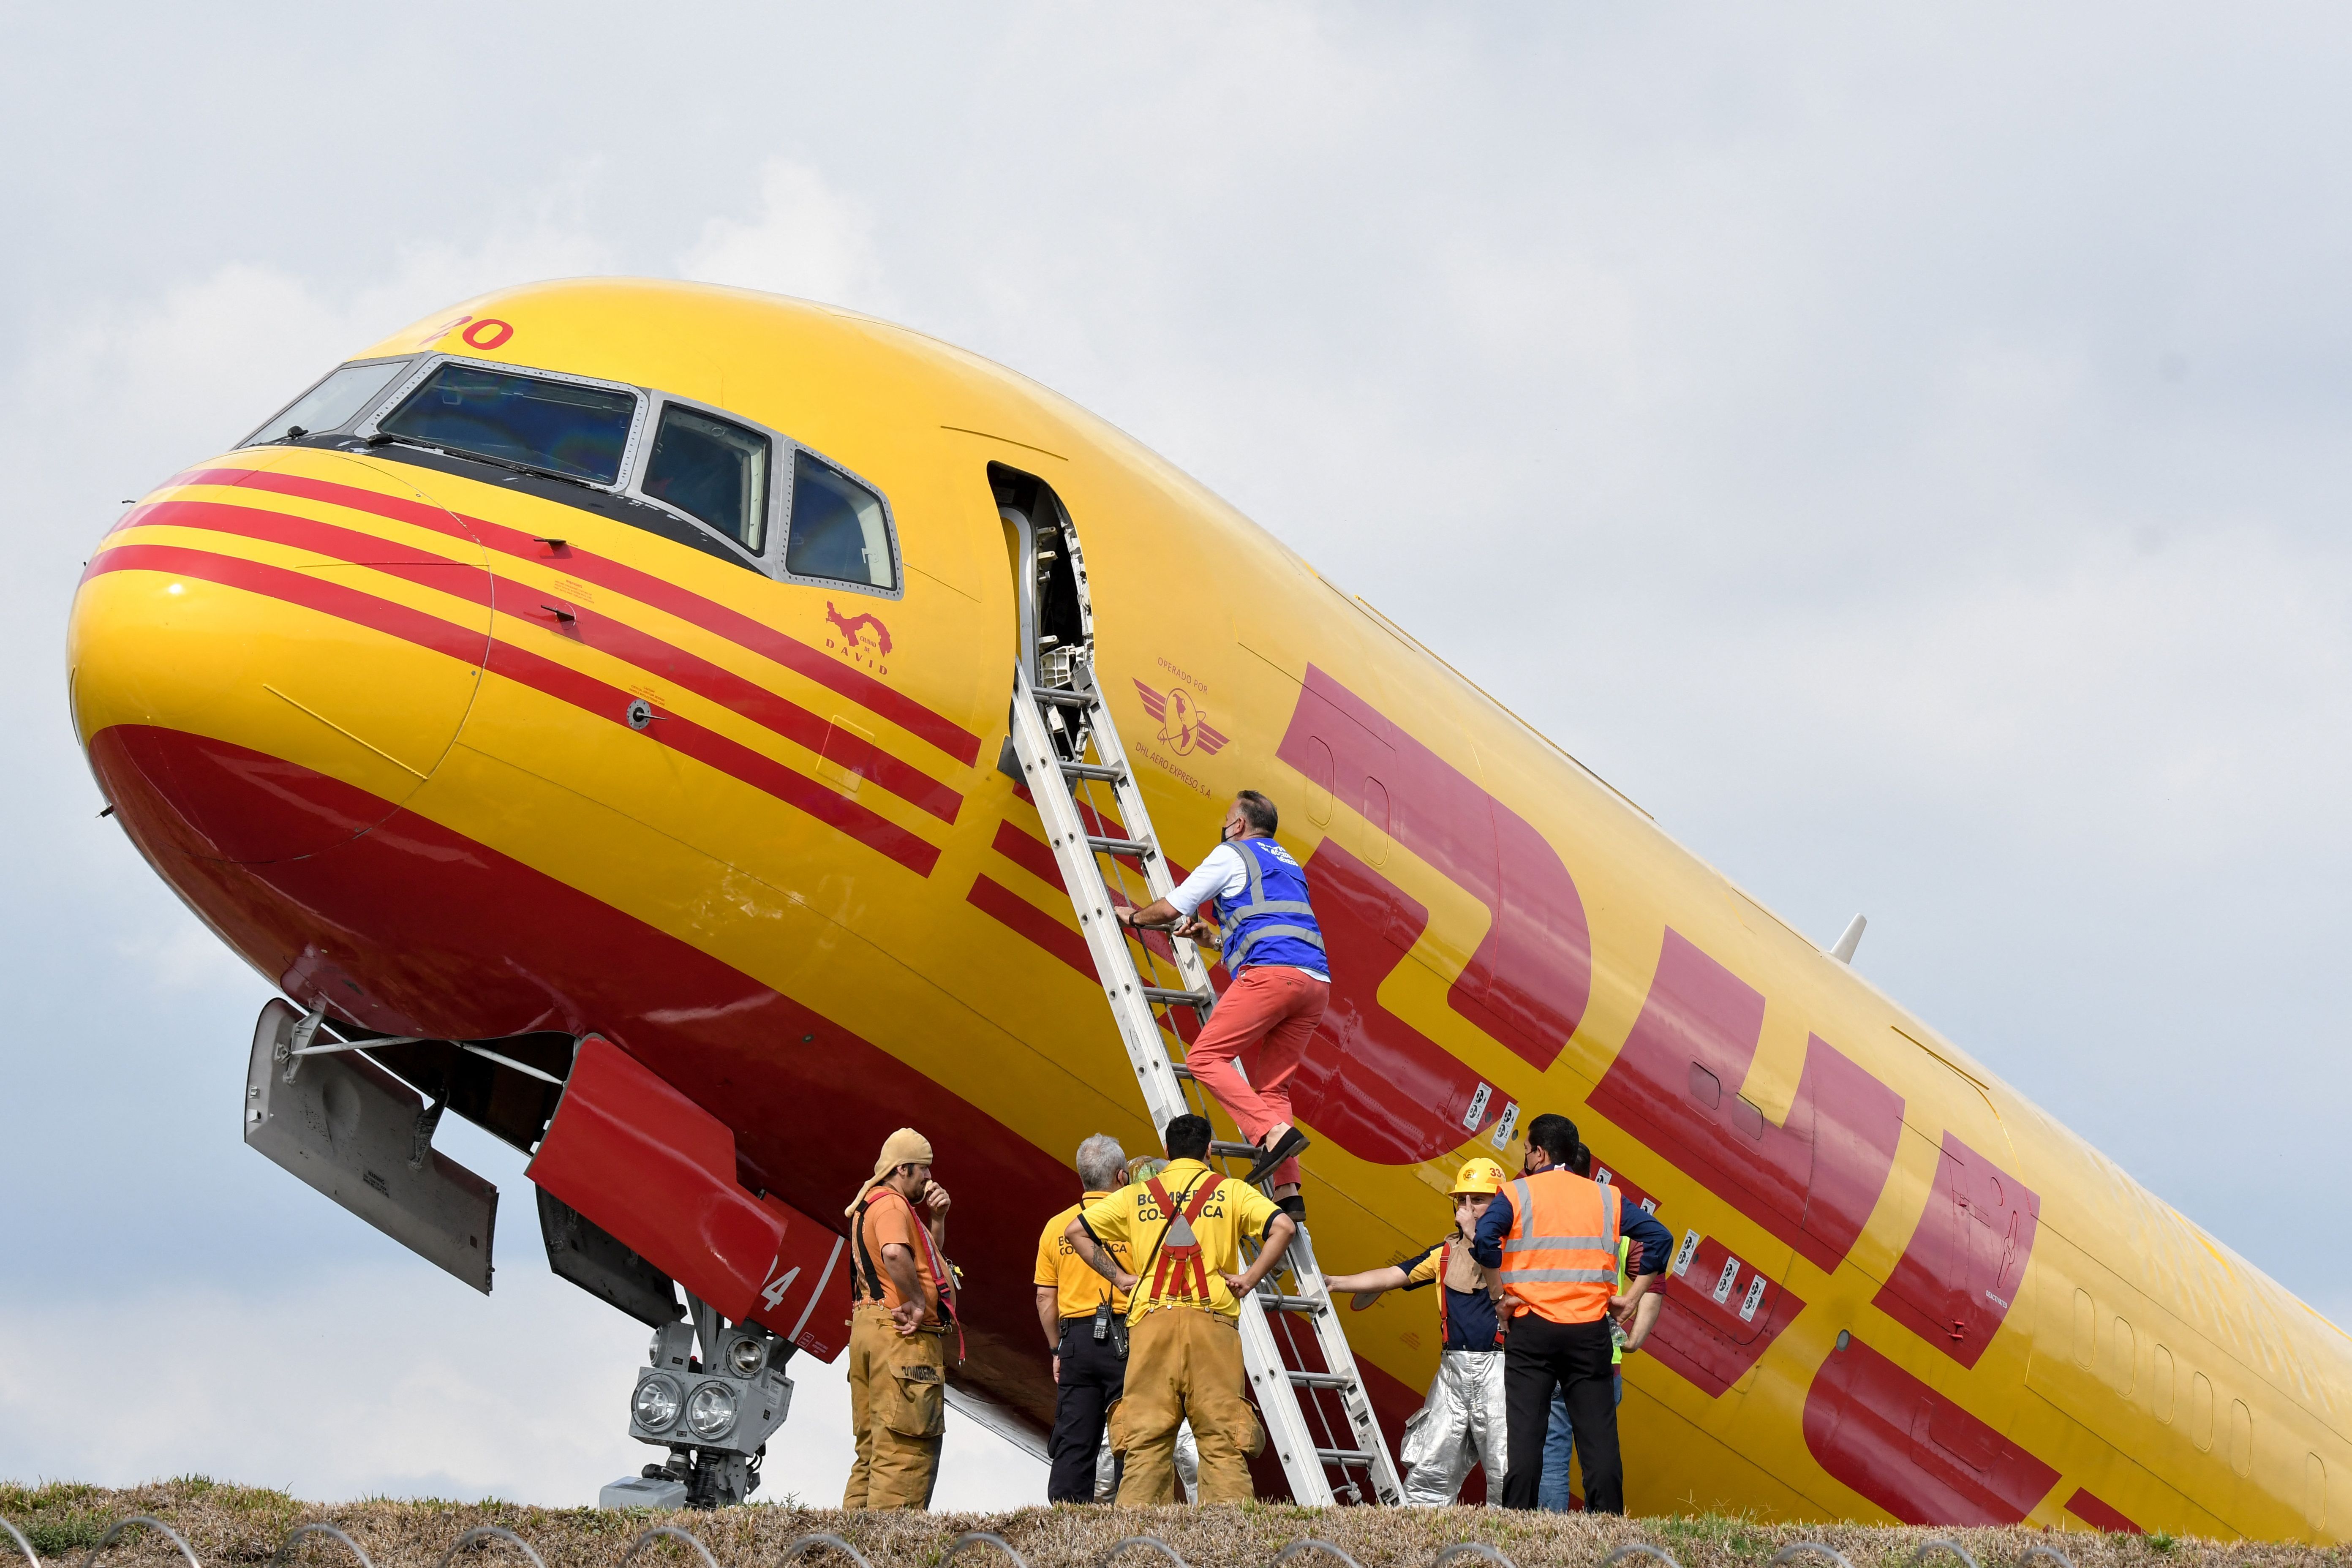 A DHL cargo plane is seen after emergency landing at the Juan Santa Maria international airport due to a mechanical problem, in Alajuela, Costa Rica, on April 7, 2022.